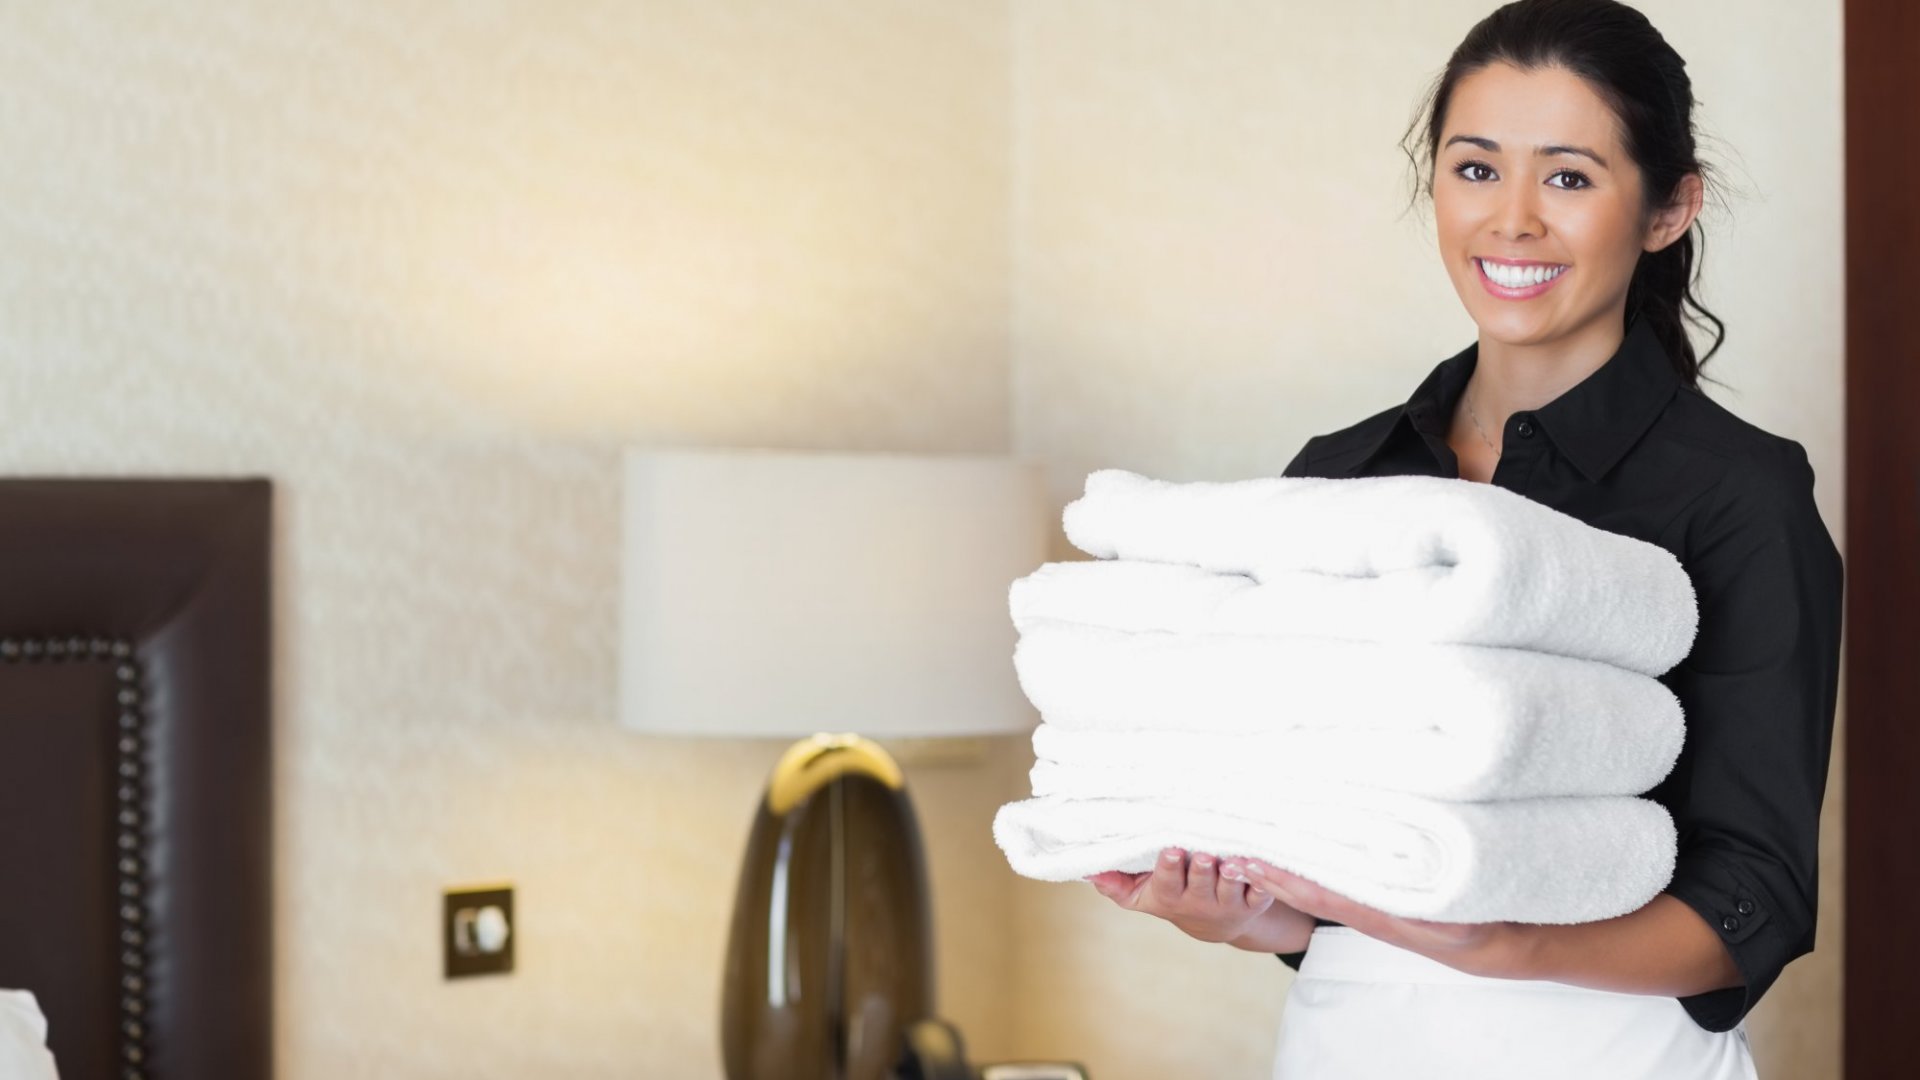 This Is How You're Supposed to Tip Your Hotel Housekeeper, According to an Industry Insider